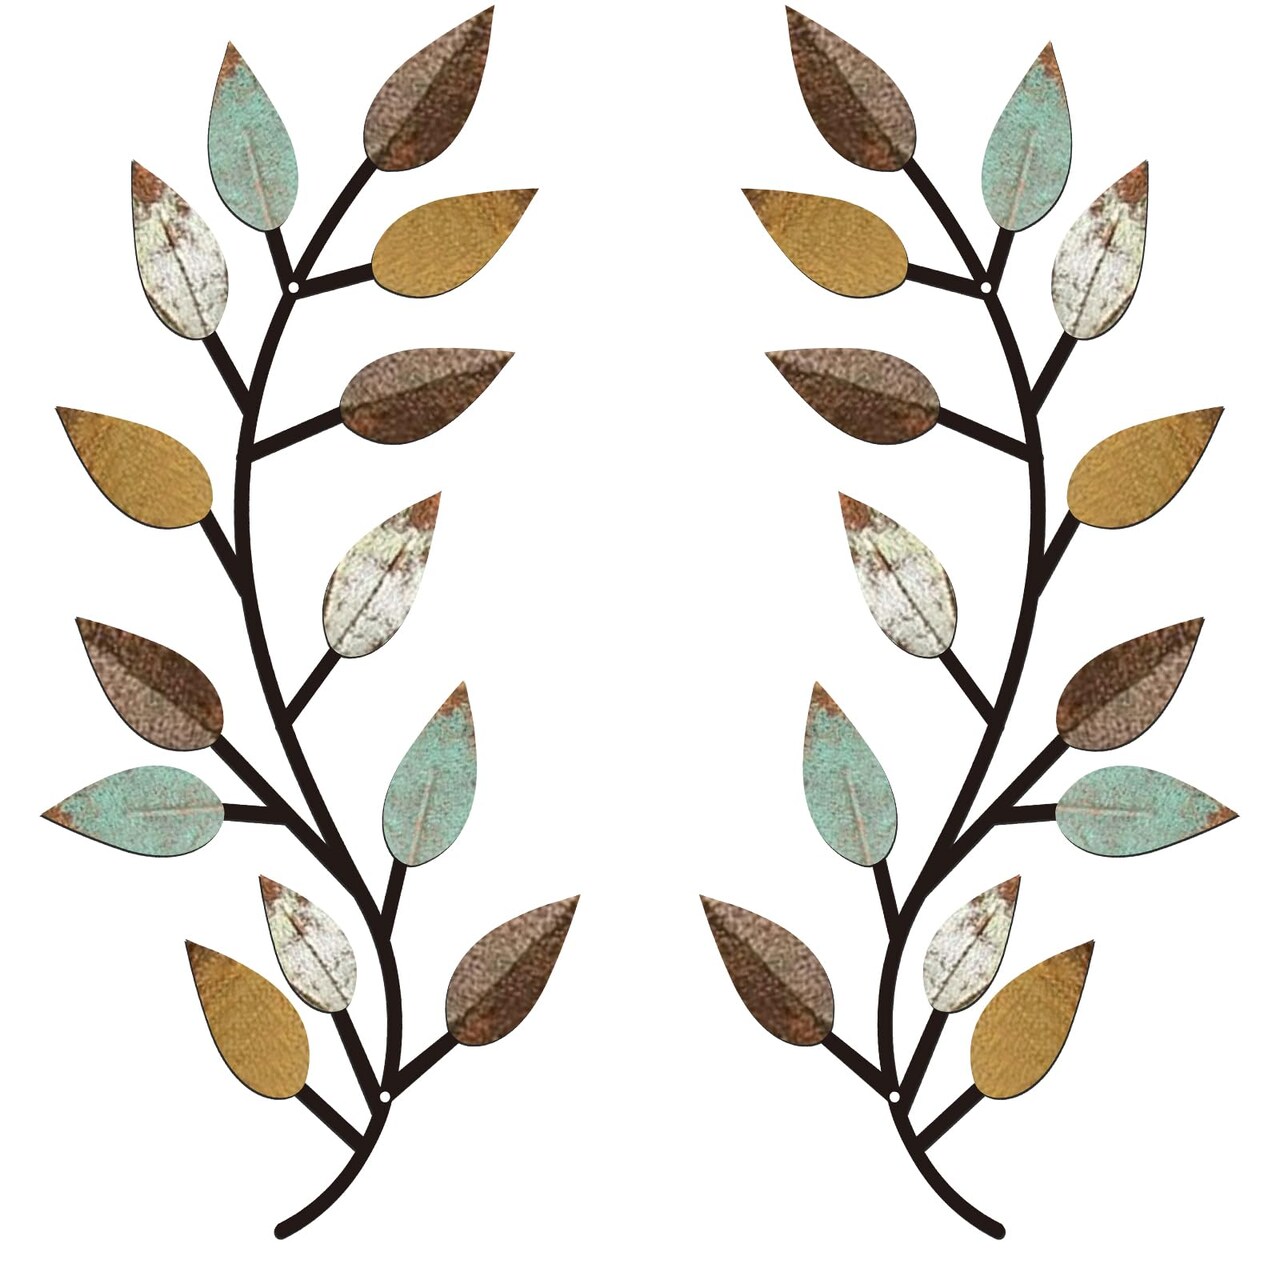 2 Pieces Metal Tree Leaf Wall Decor Vine Olive Branch Leaf Wall Art Wrought Iron Scroll Above The Bed, Living Room, Outdoor Decoration (Bright Colors)